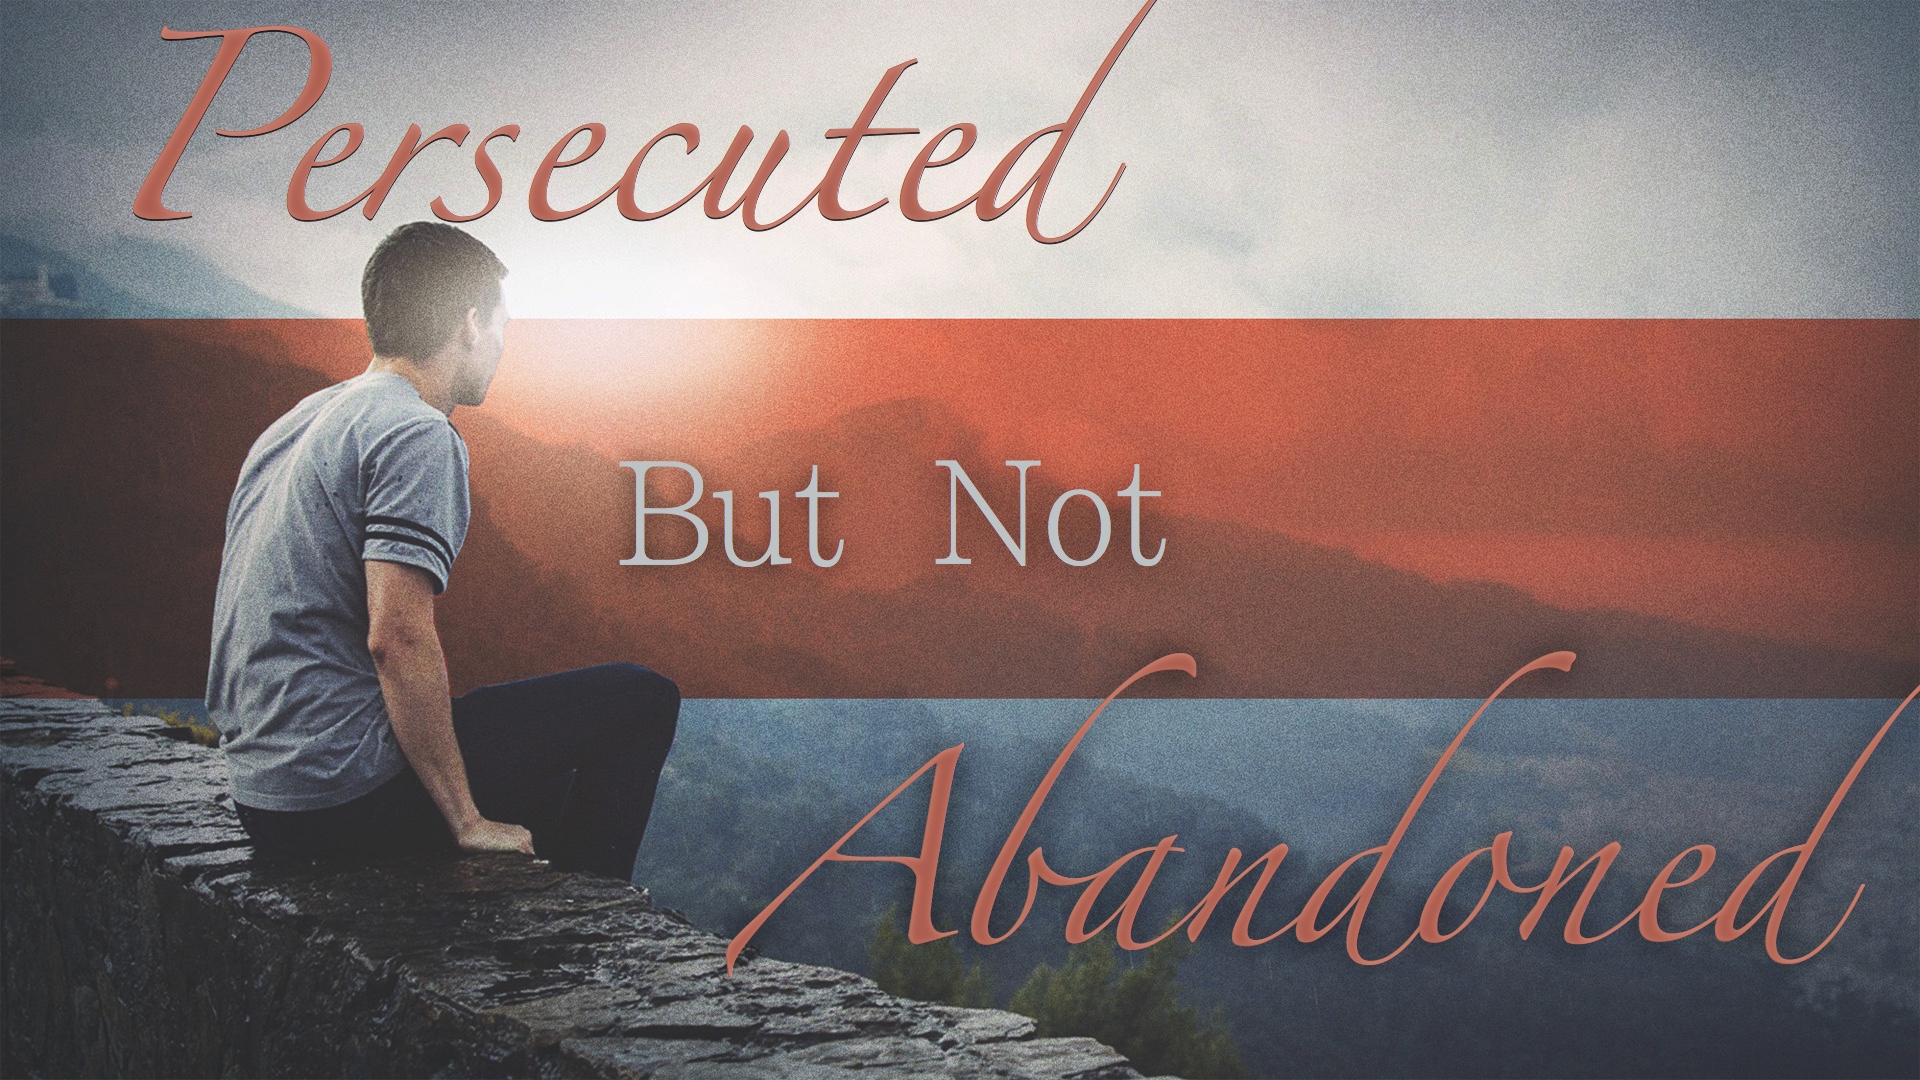 persecuted-but-not-abandoned